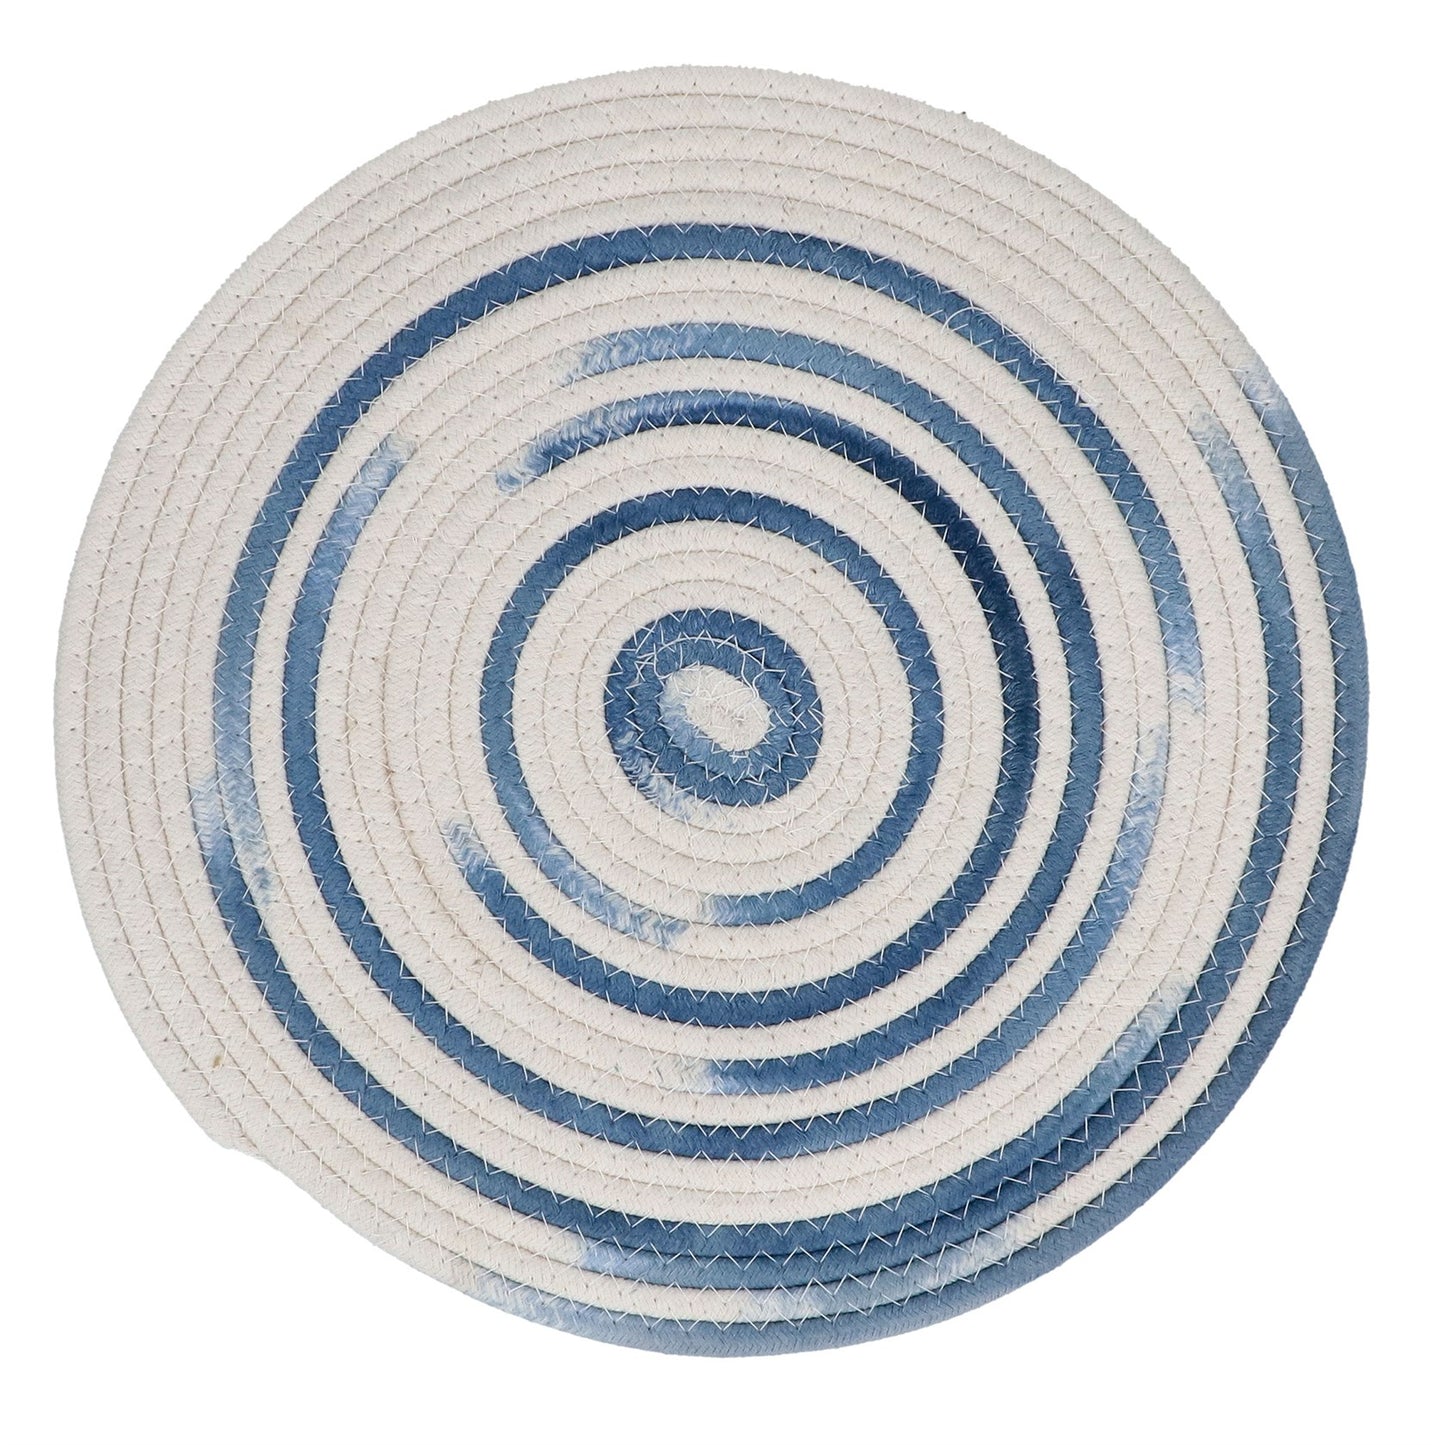 Blue & White Ombre Round Rope Placemat